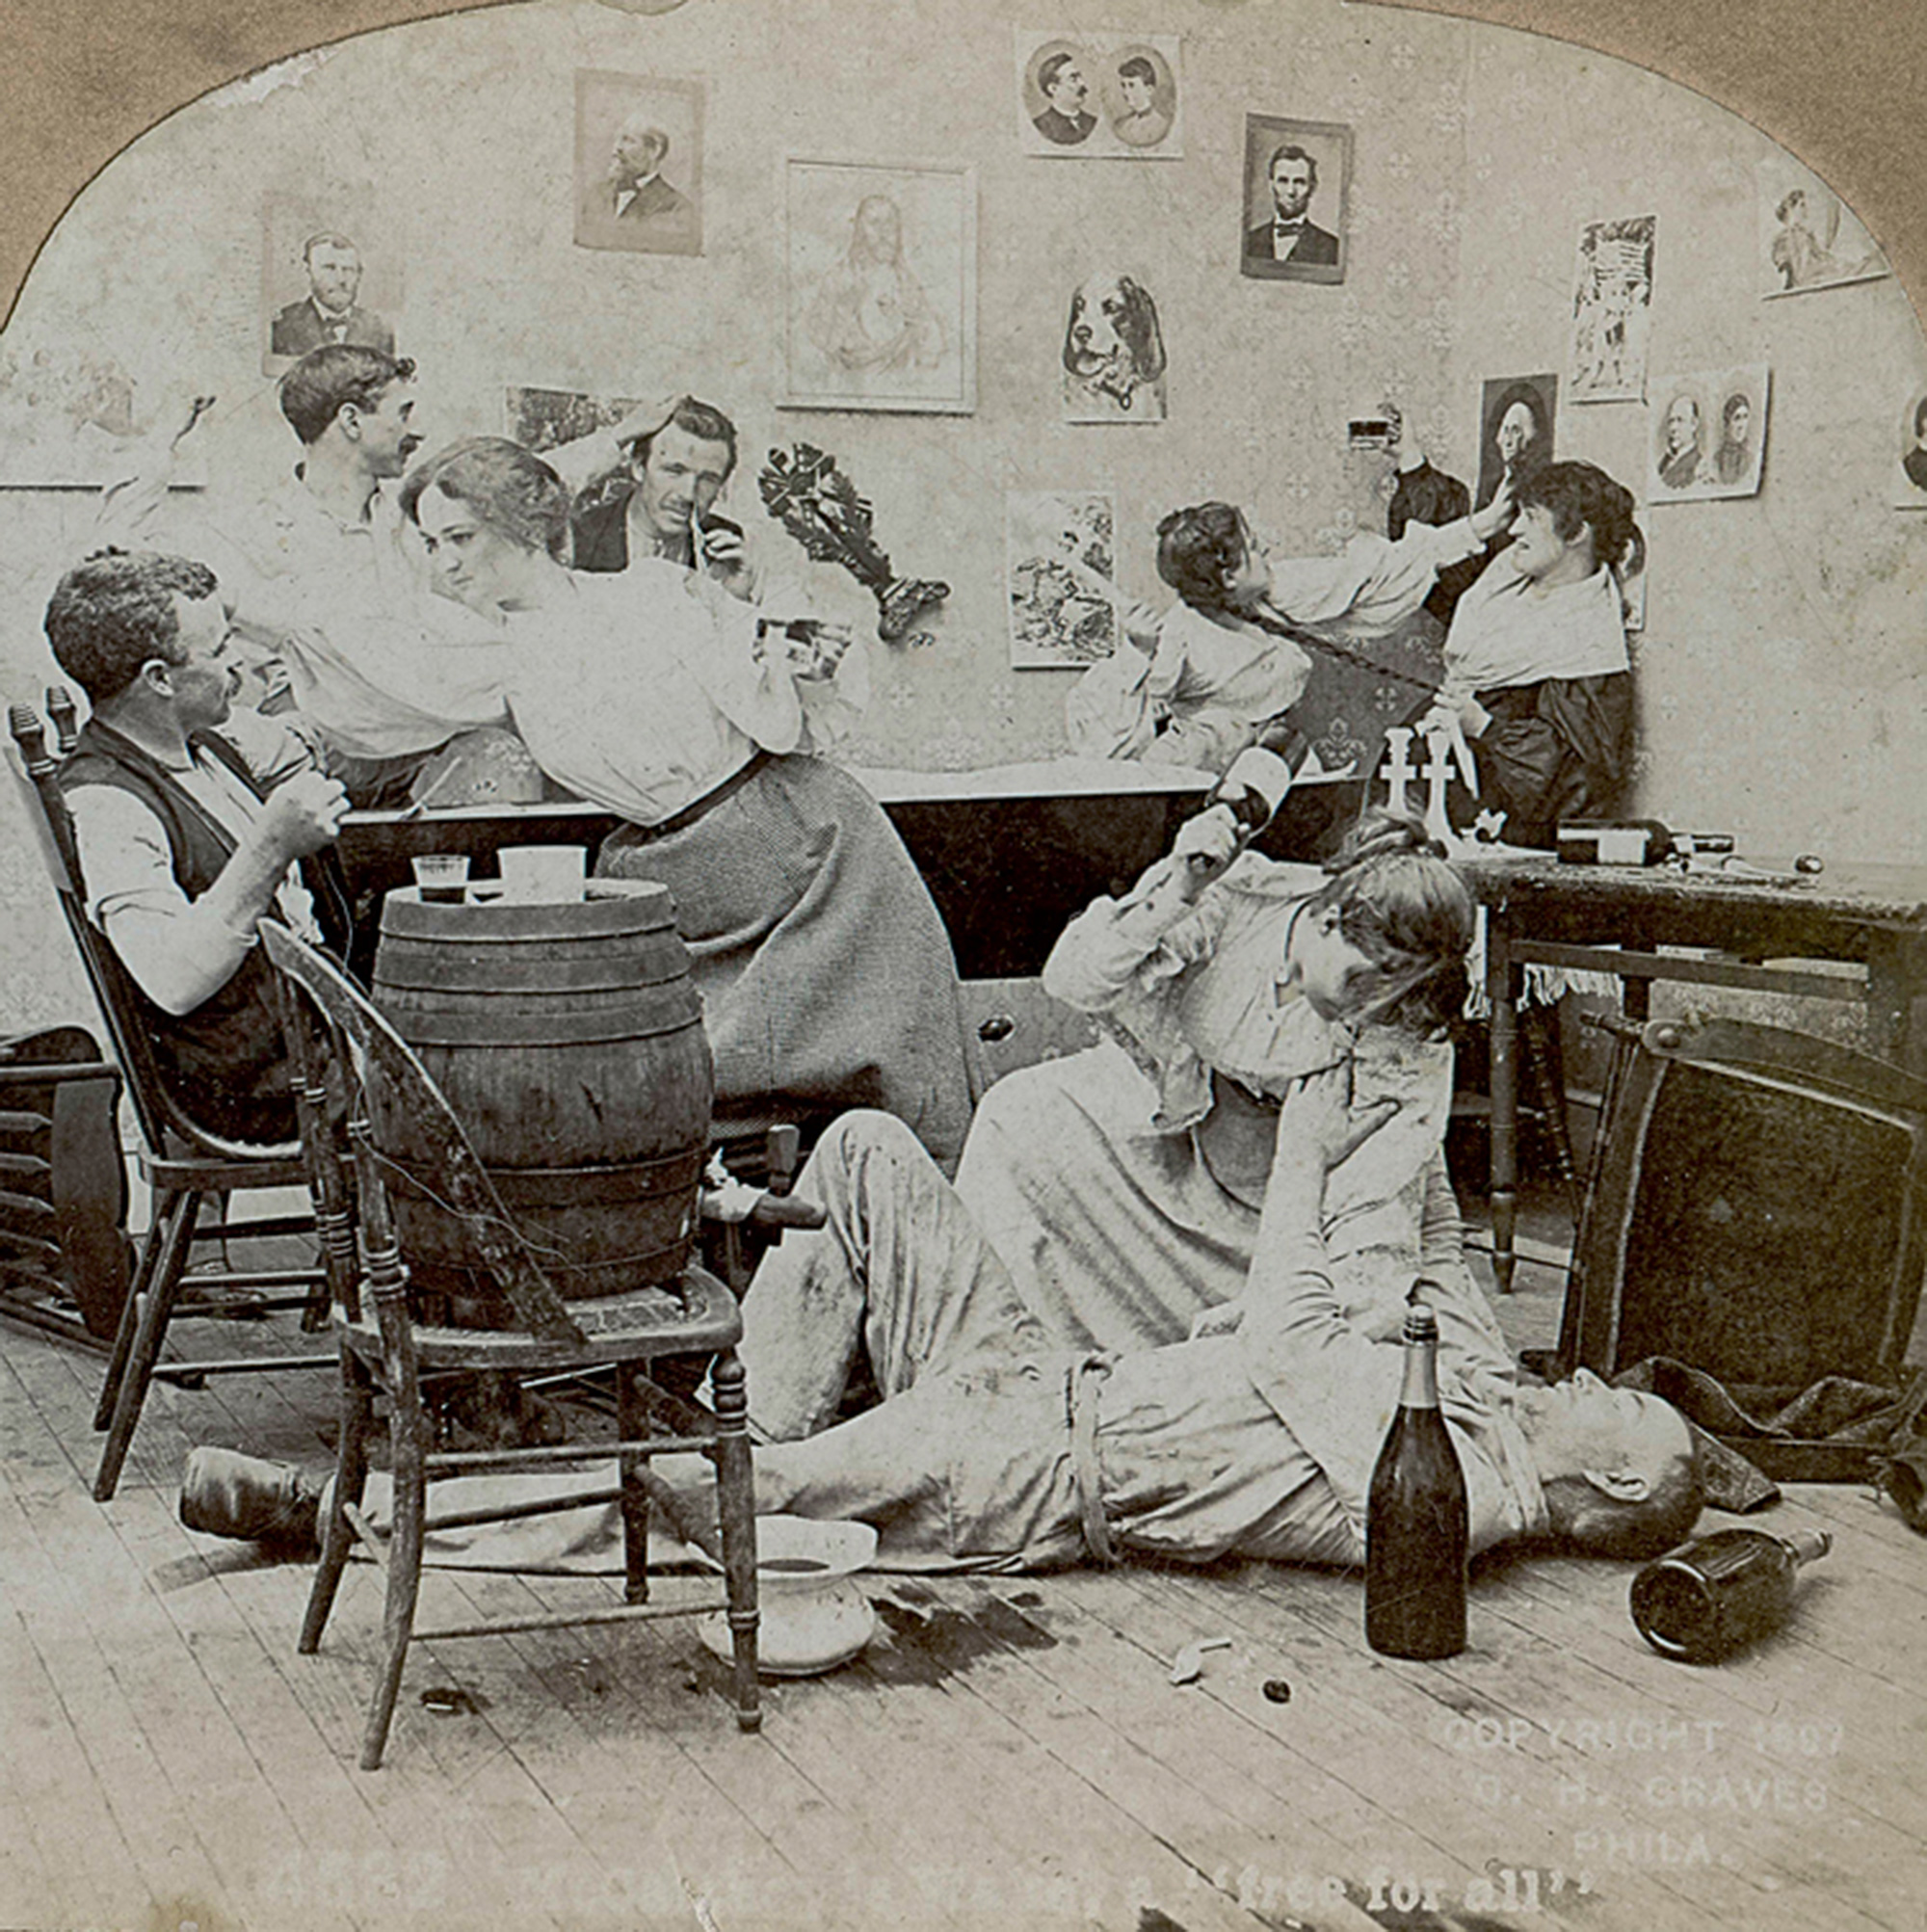 A reenactment of an Irish wake shown on a stereoview card published in Philadelphia in eighteen ninety-seven. Faint text on bottom reads: “McCarthy’s Wake, a ‘free for all.’” 